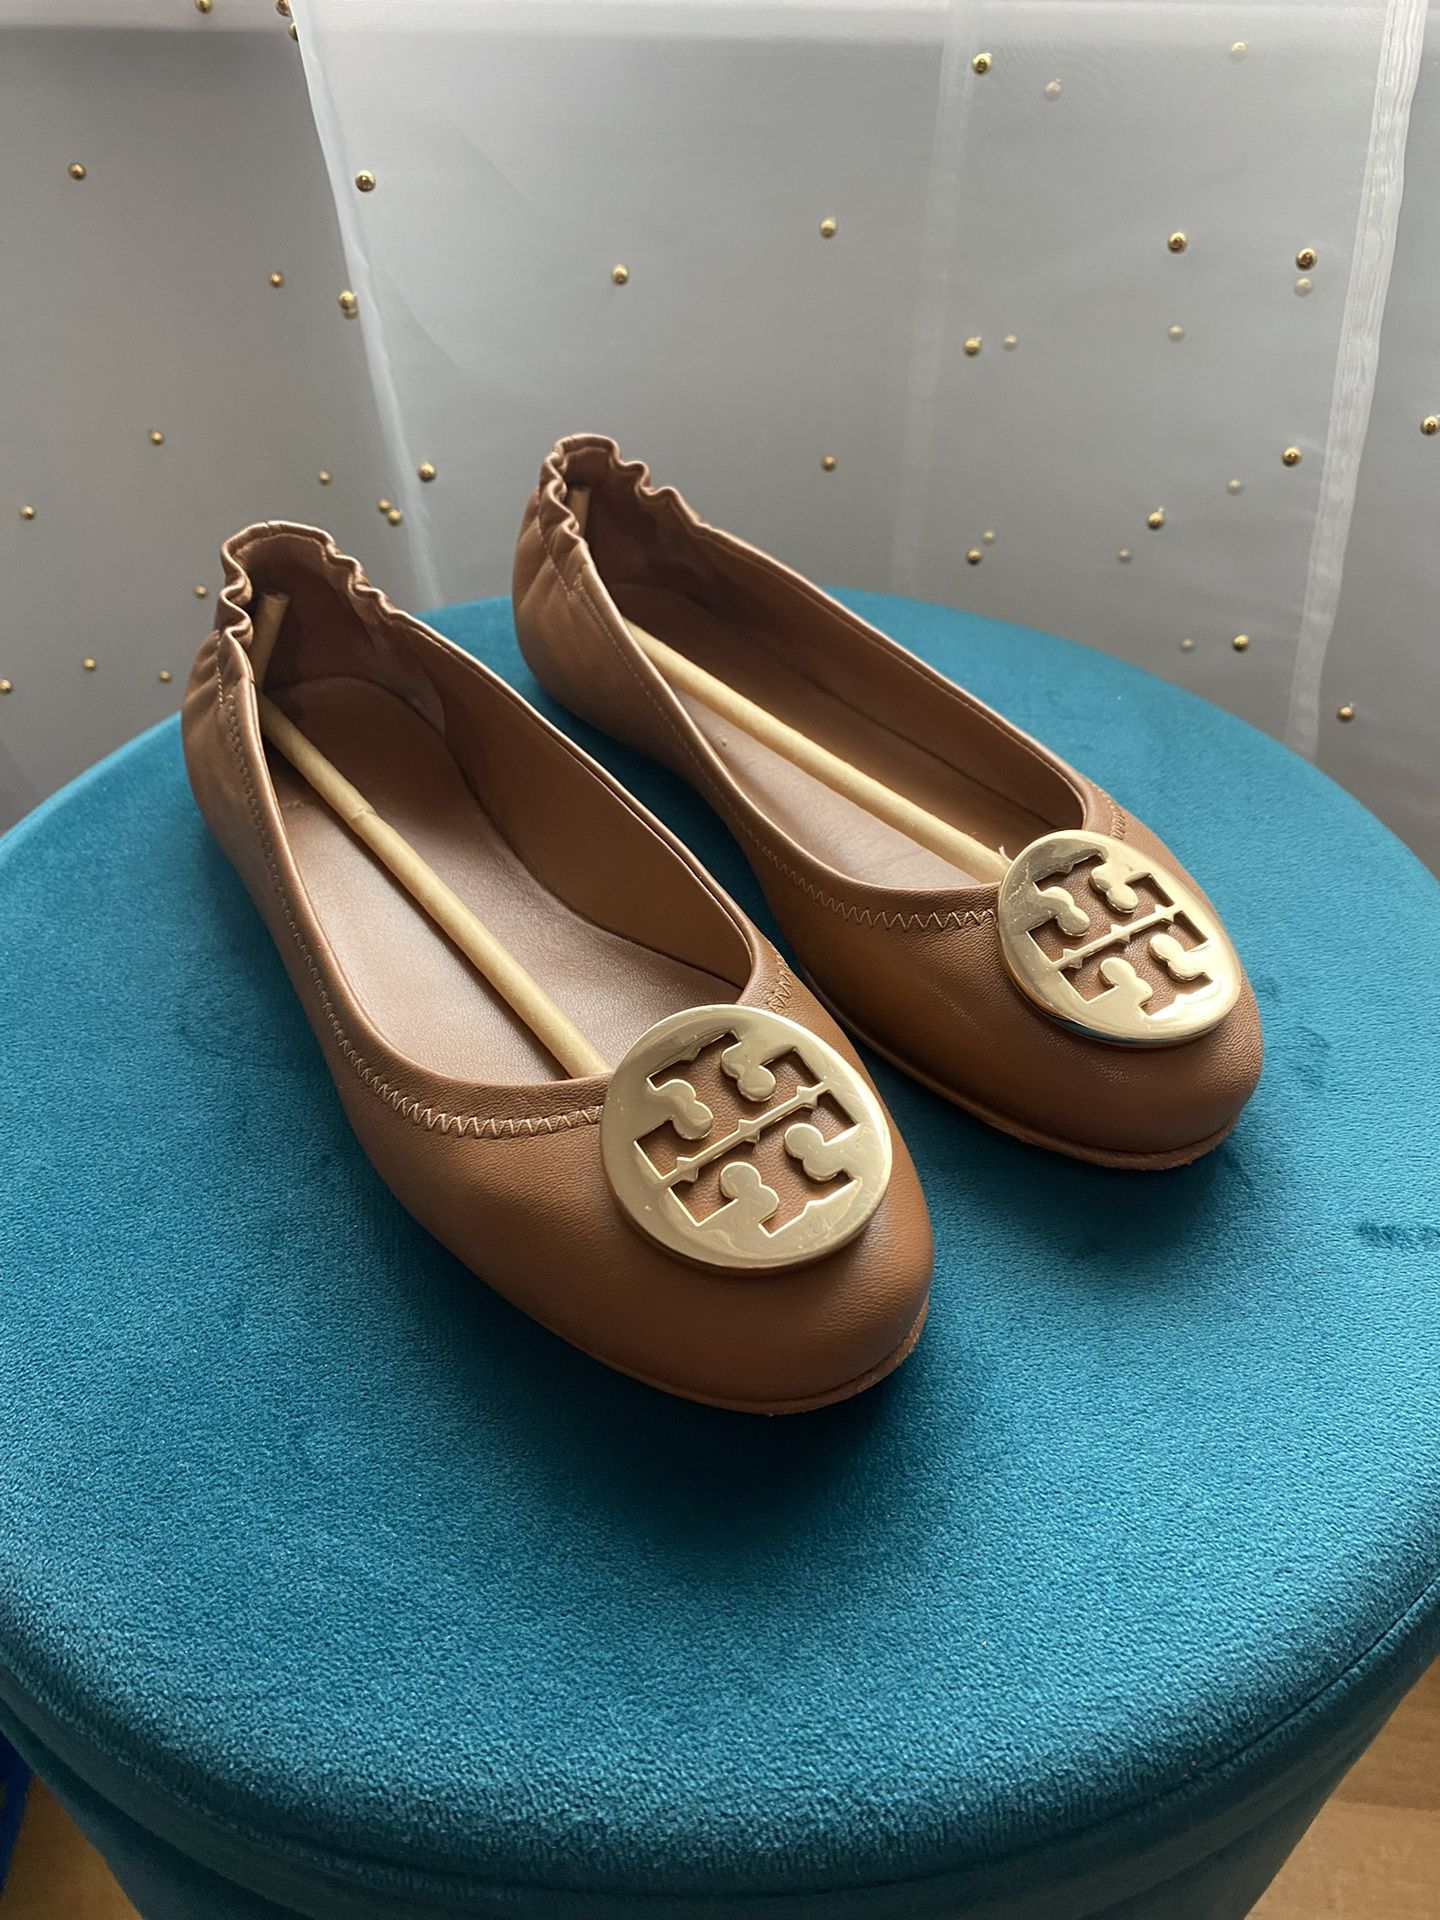 Barely Used Tory Burch Minnie Flats 